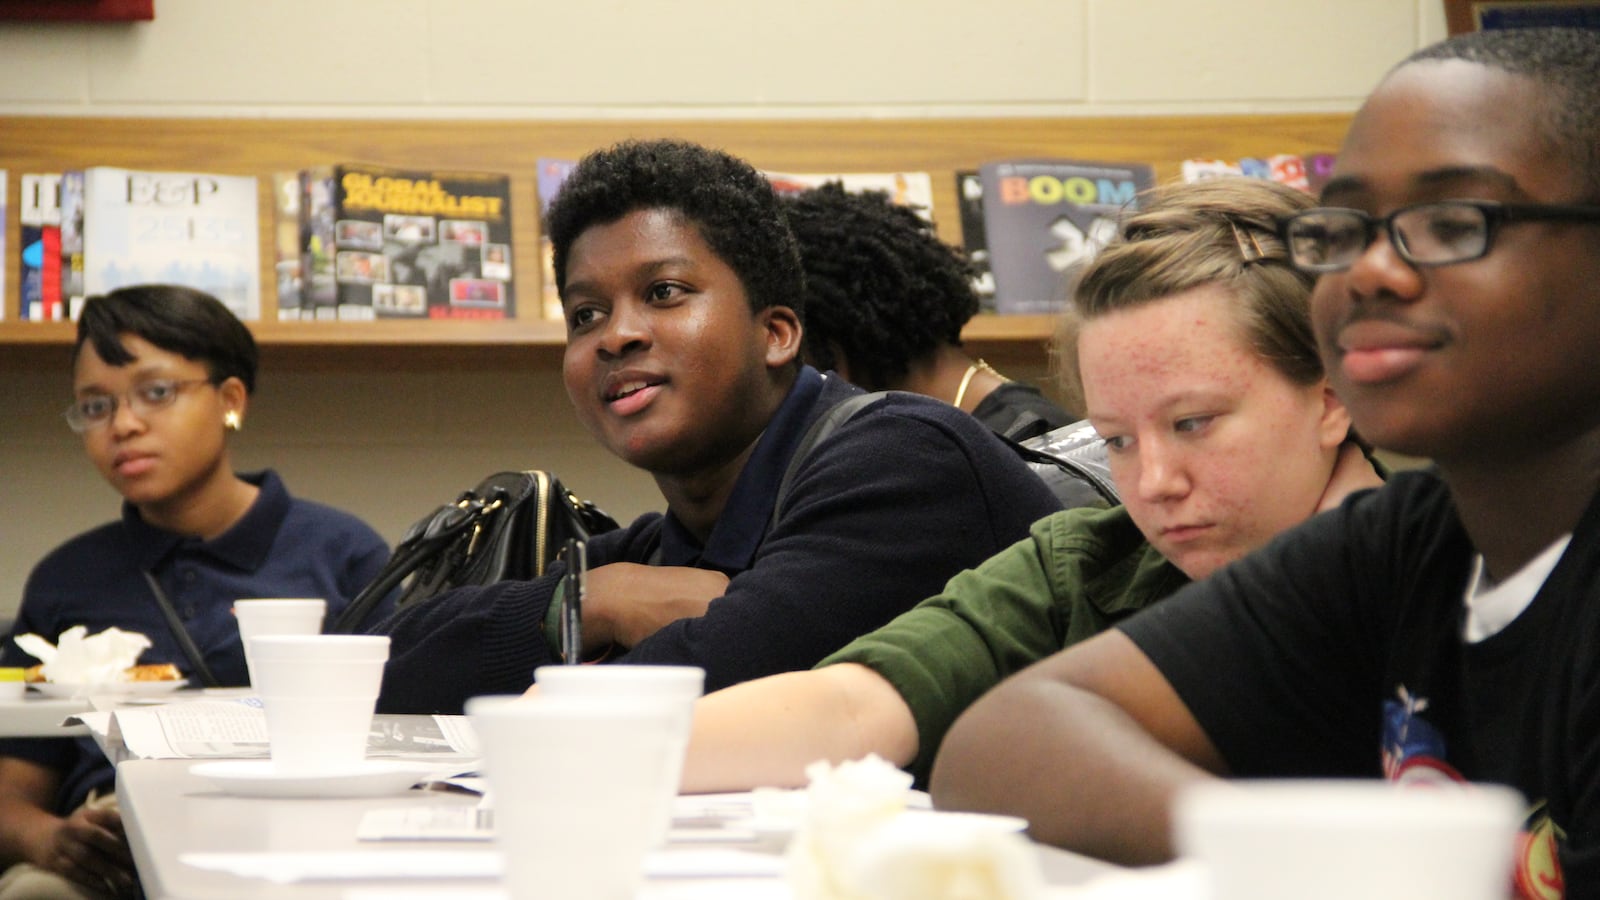 Students meet for their monthly editorial meeting on the University of Memphis campus.